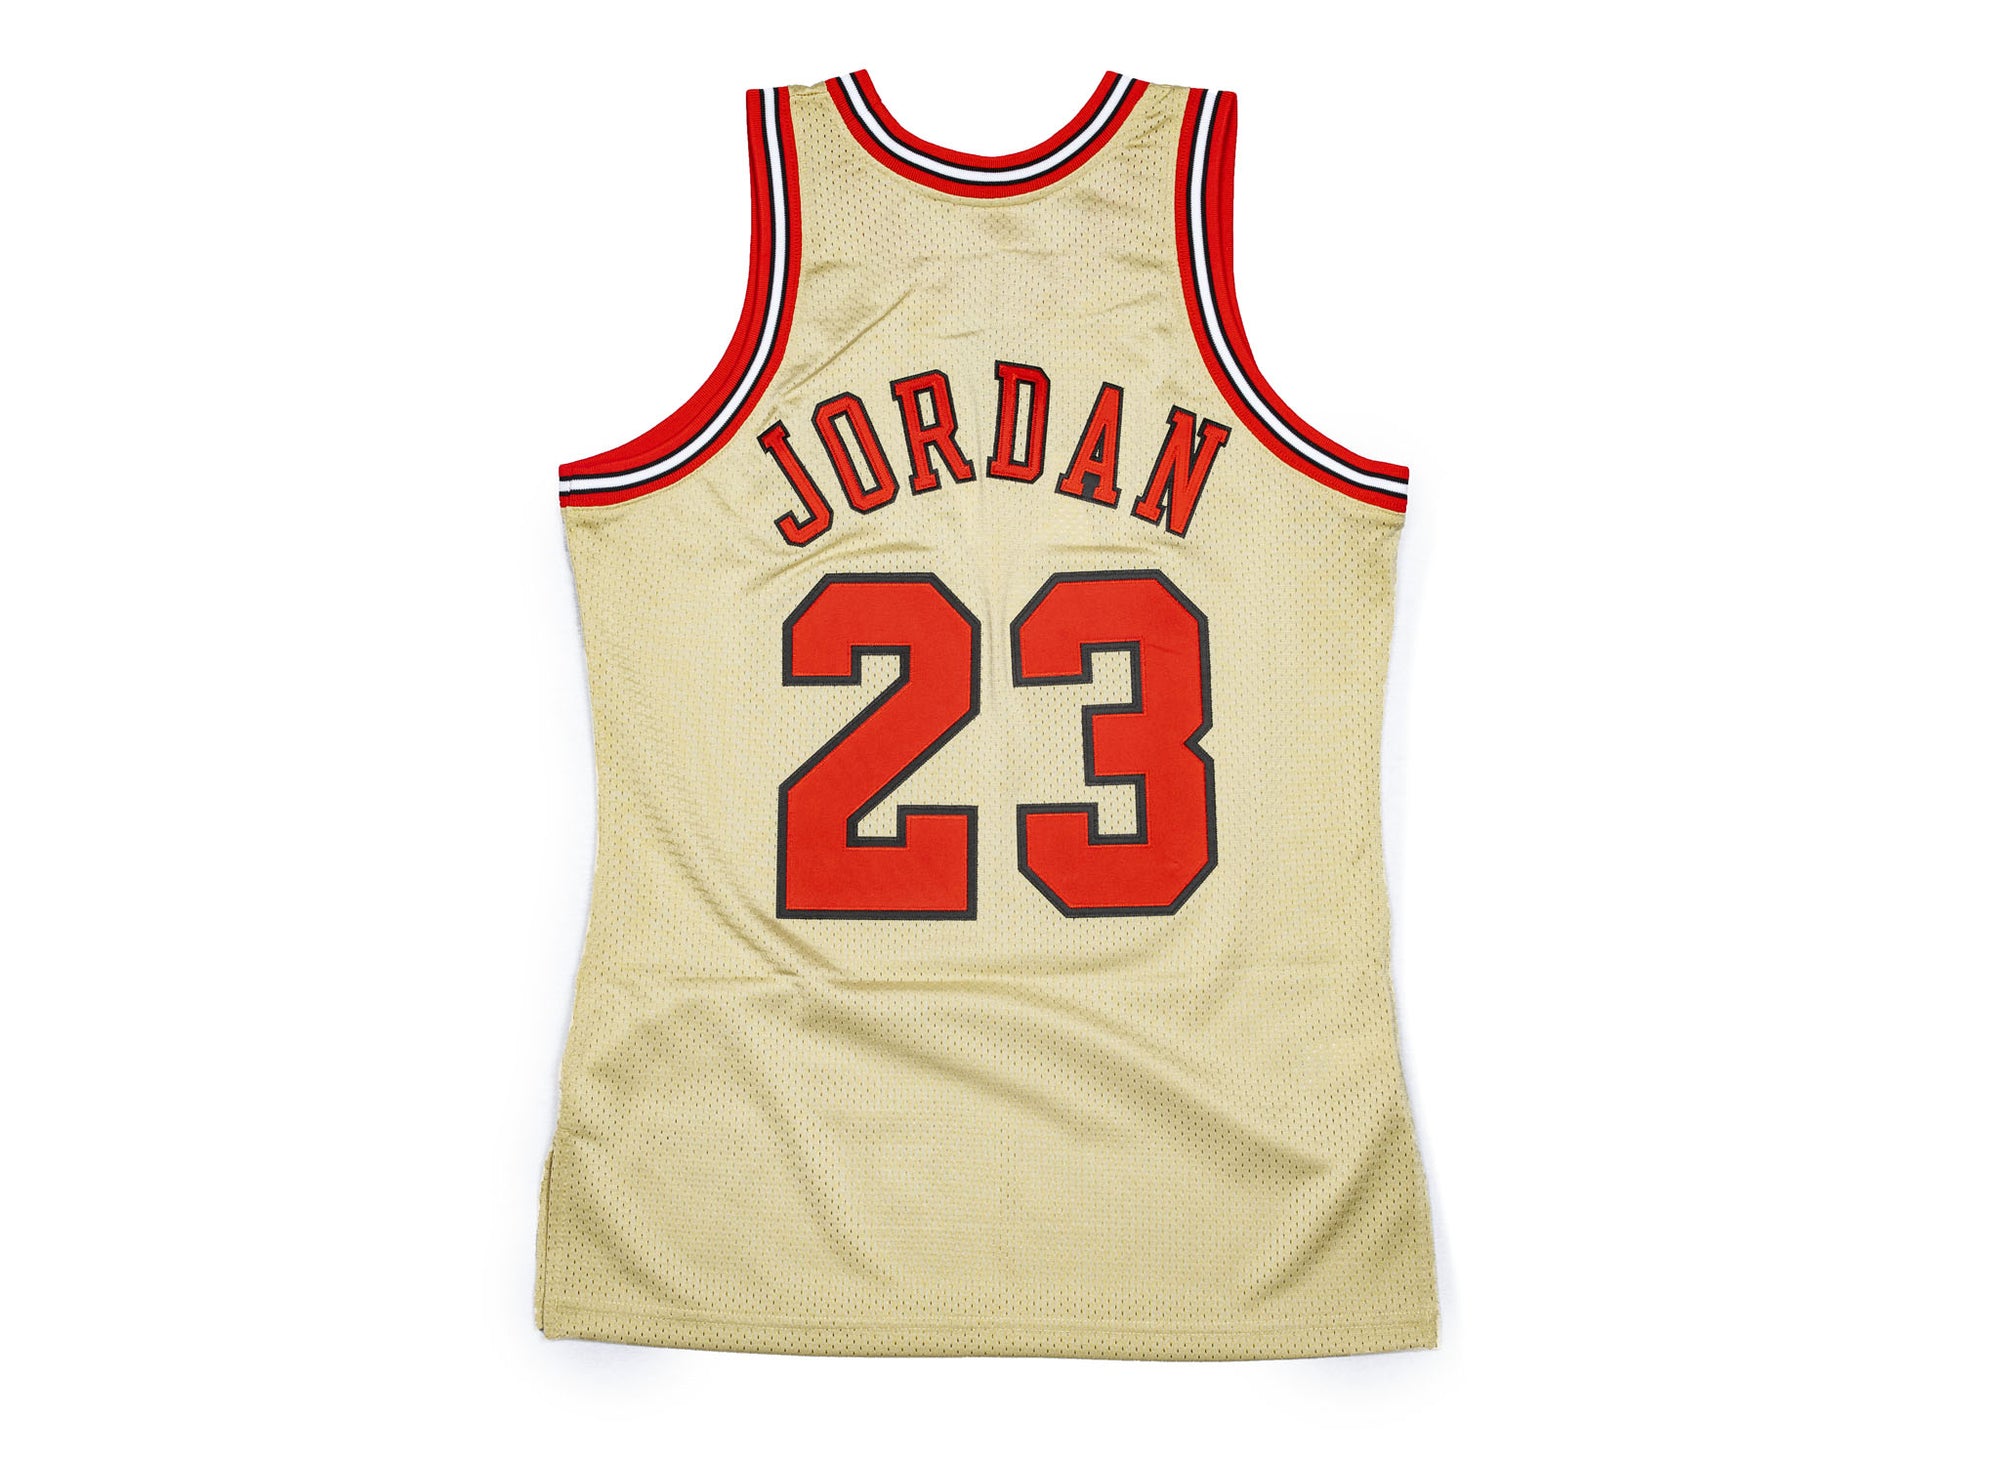 red and gold basketball jersey